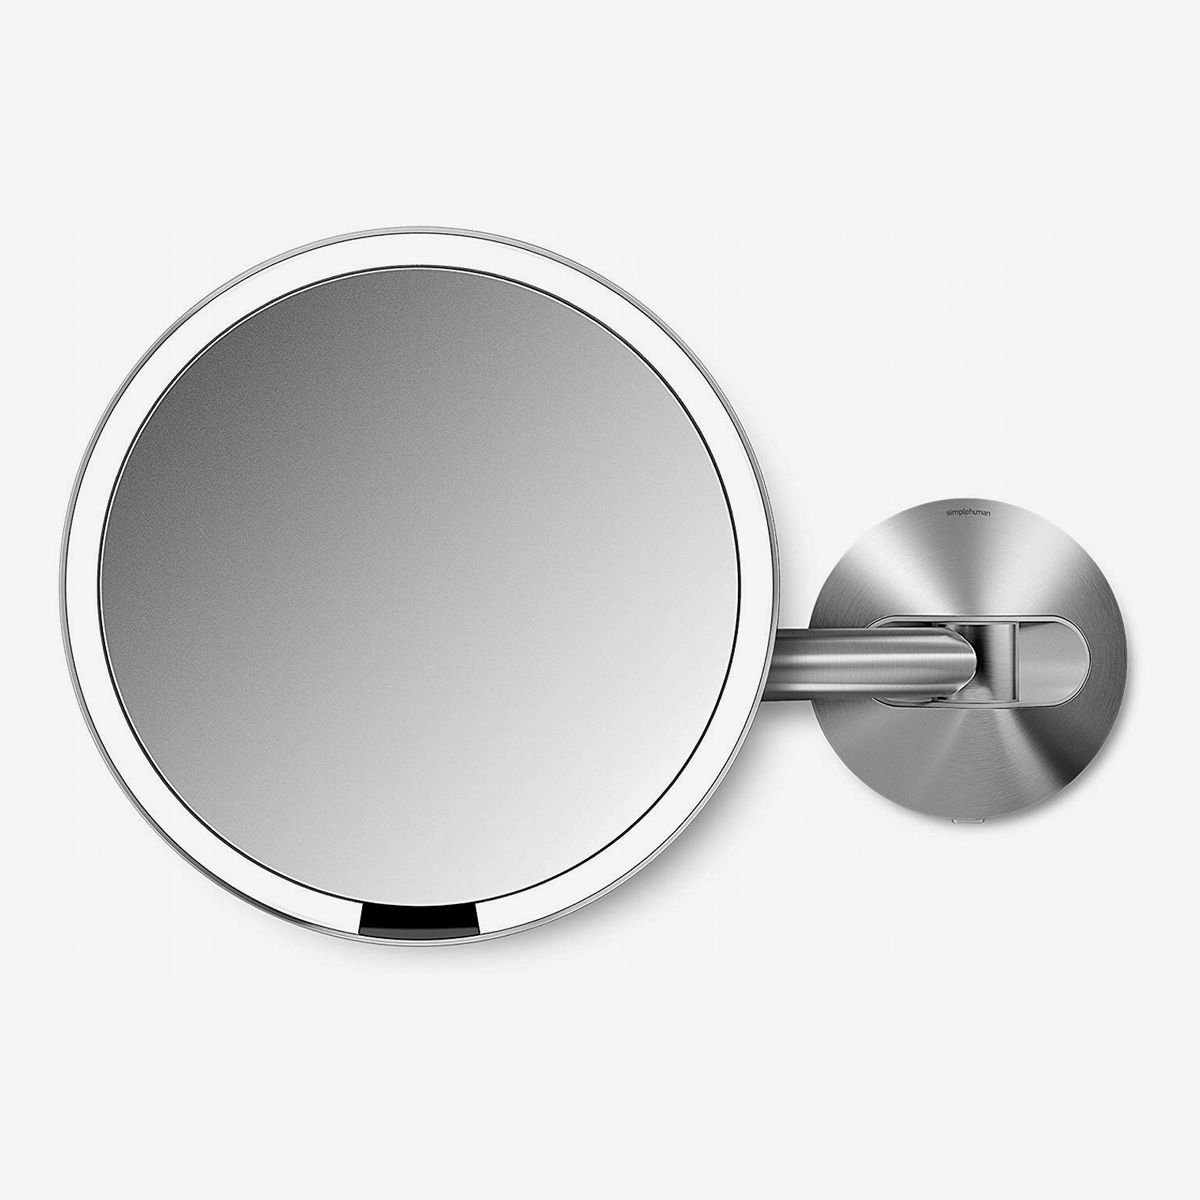 8INCH Lighted Makeup Mirror 10X Magnifying Wall Mounted Mirrors And Home Bathroom Vanity Makeup Mirror Bright Diffused Light And 360 Degree Swivel,Black,3X